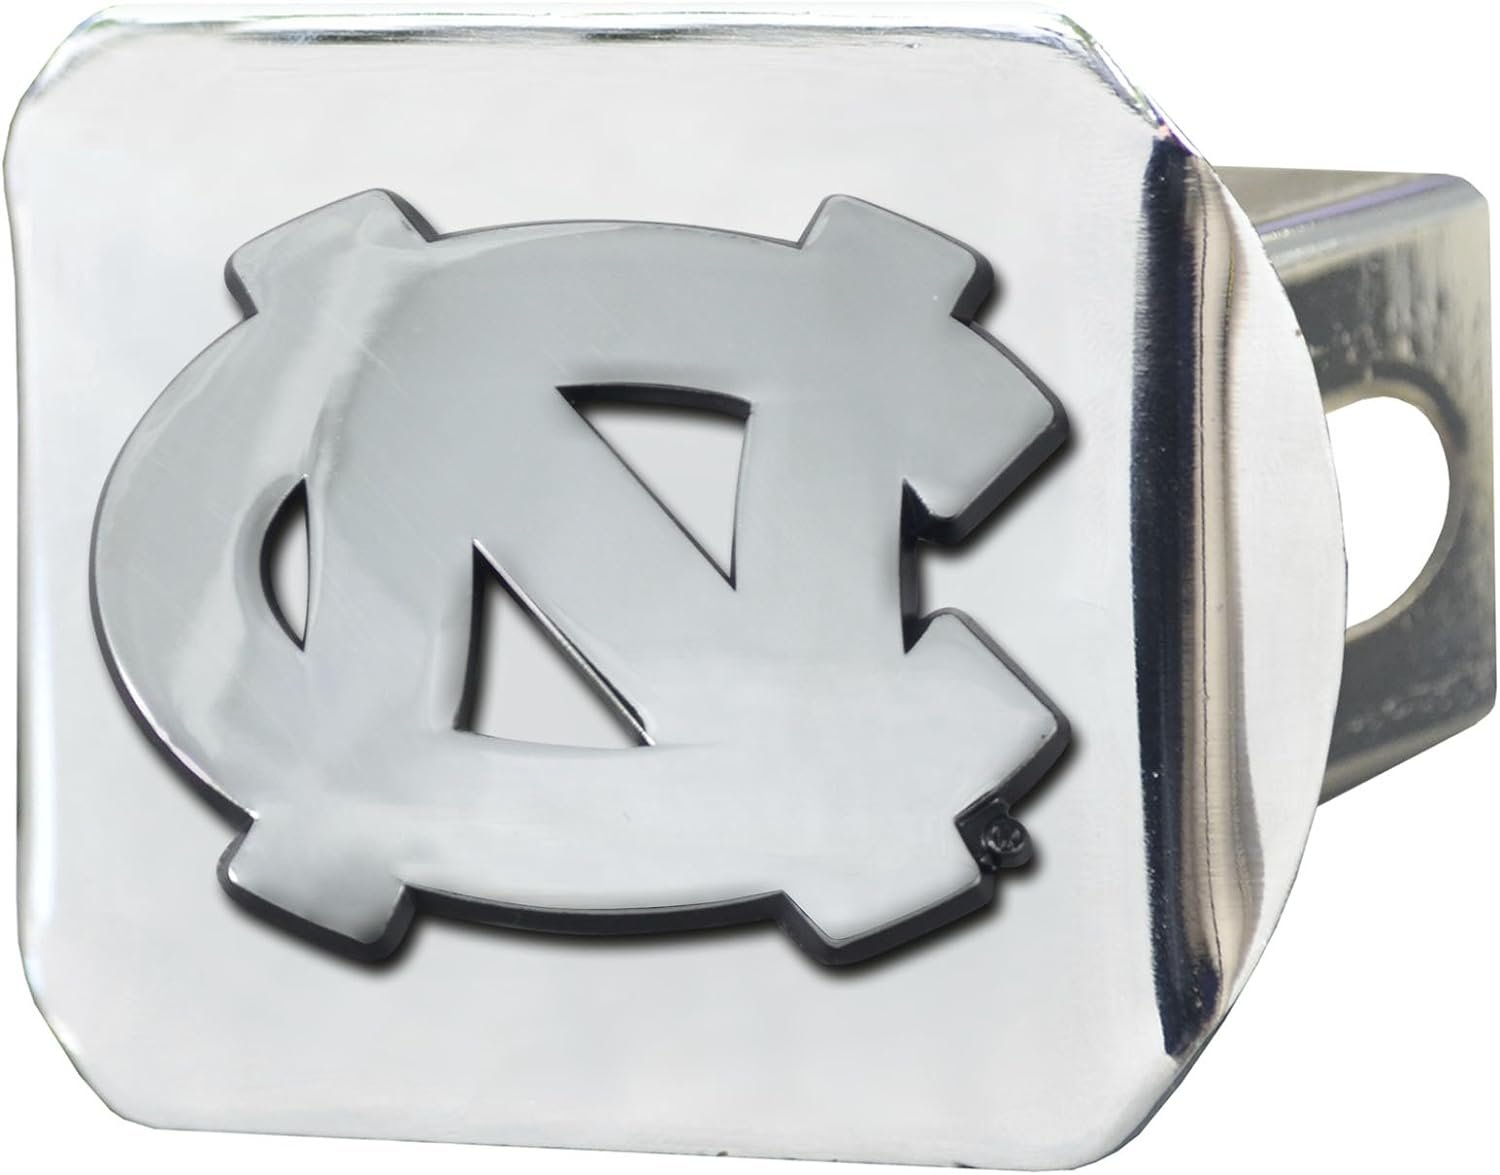 University of North Carolina Tar Heels Hitch Cover Solid Metal with Raised Chrome Metal Emblem 2" Square Type III